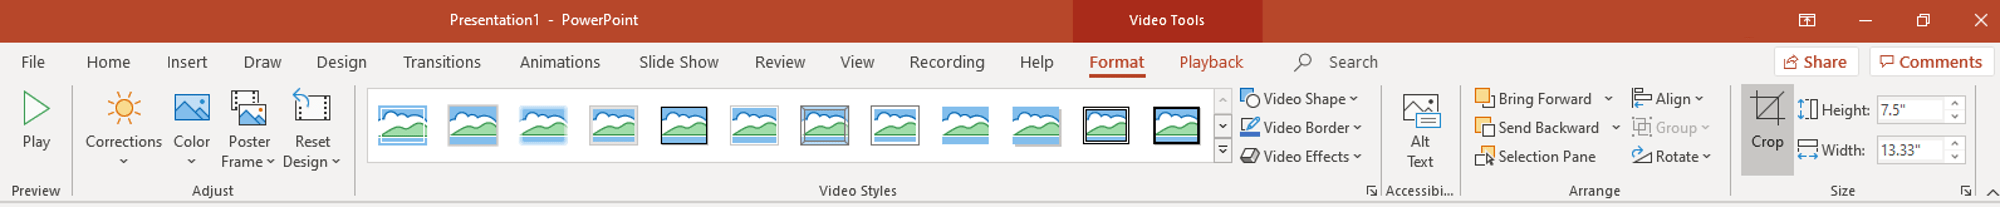 Video Tools Format tab in the Ribbon in PowerPoint.